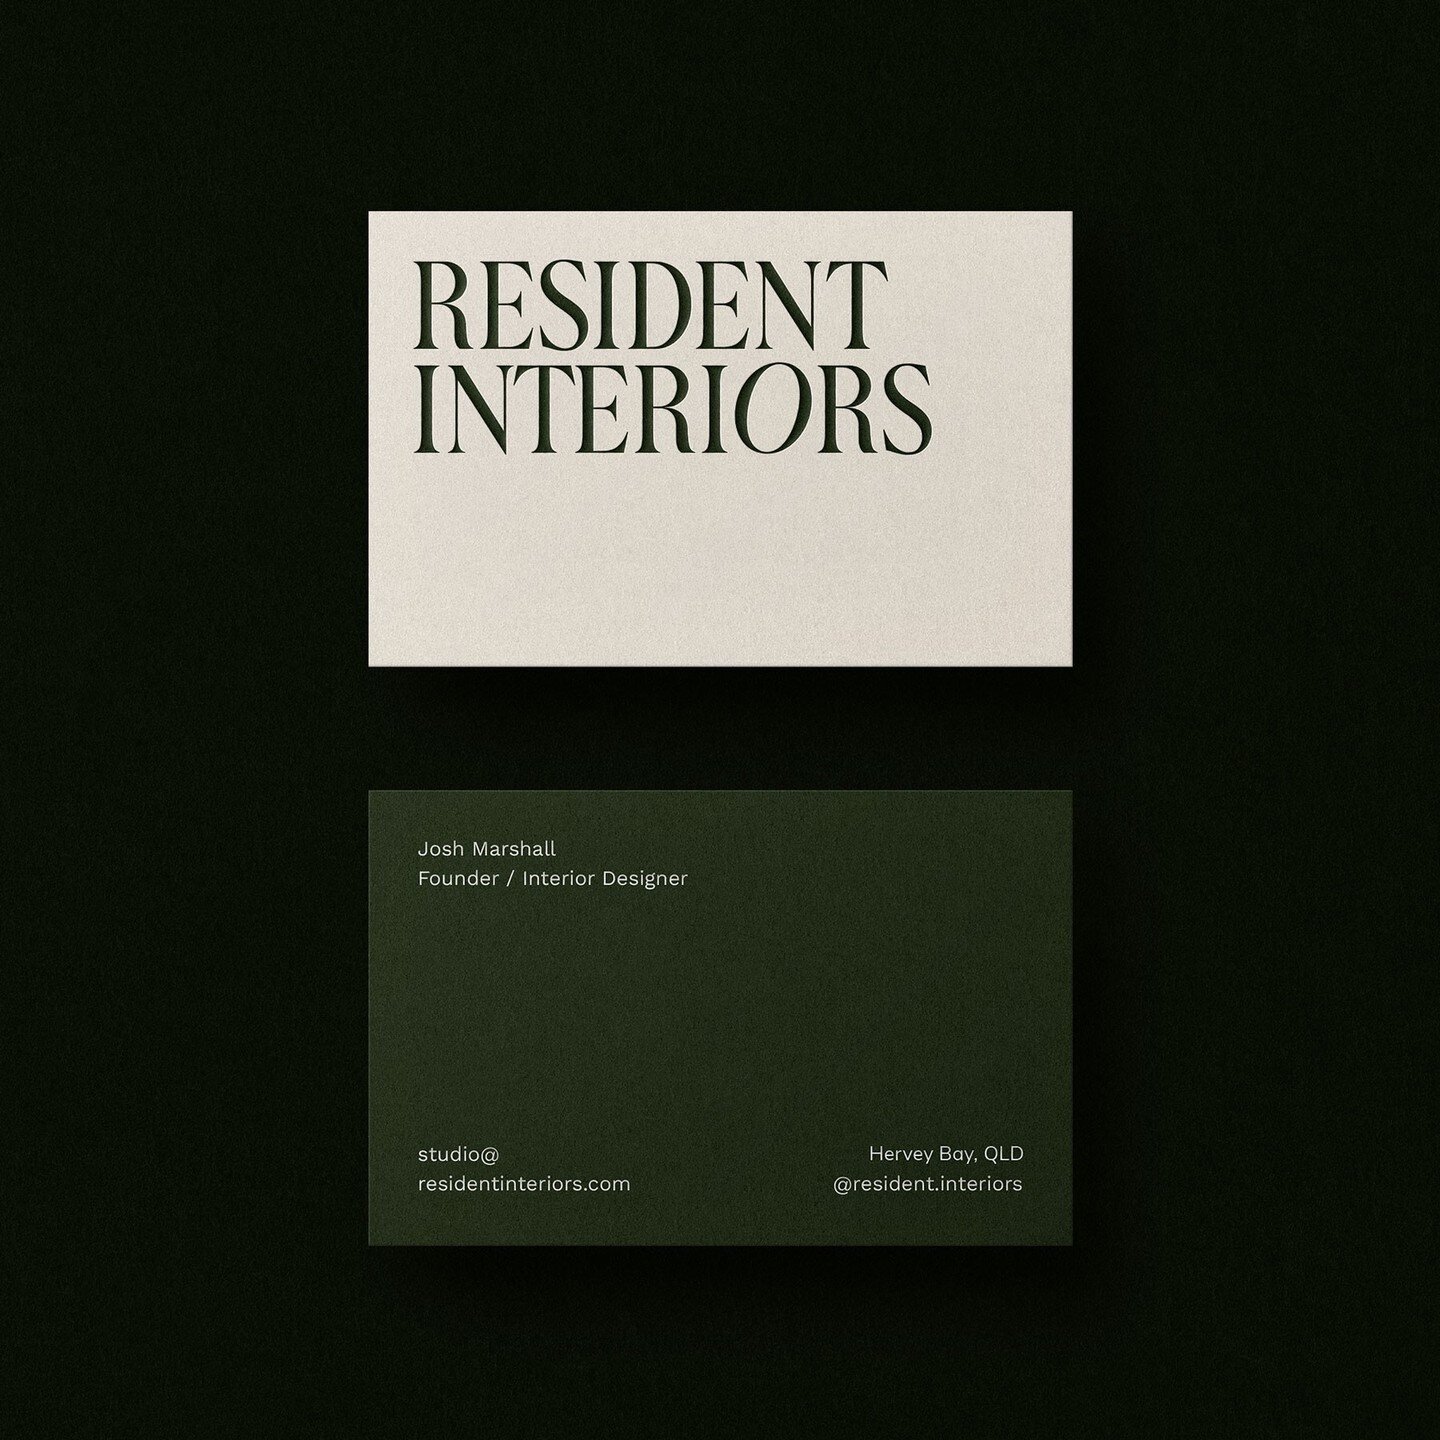 The inverted business card. A classic, but a beauty.⁠
⁠
This logo was the silver medalist but it's still one of my favourites. ⁠
'Too cool' for the laid back vibe of @resident.interiors (understandable), but difficult for us to say goodbye.⁠
⁠
Now it